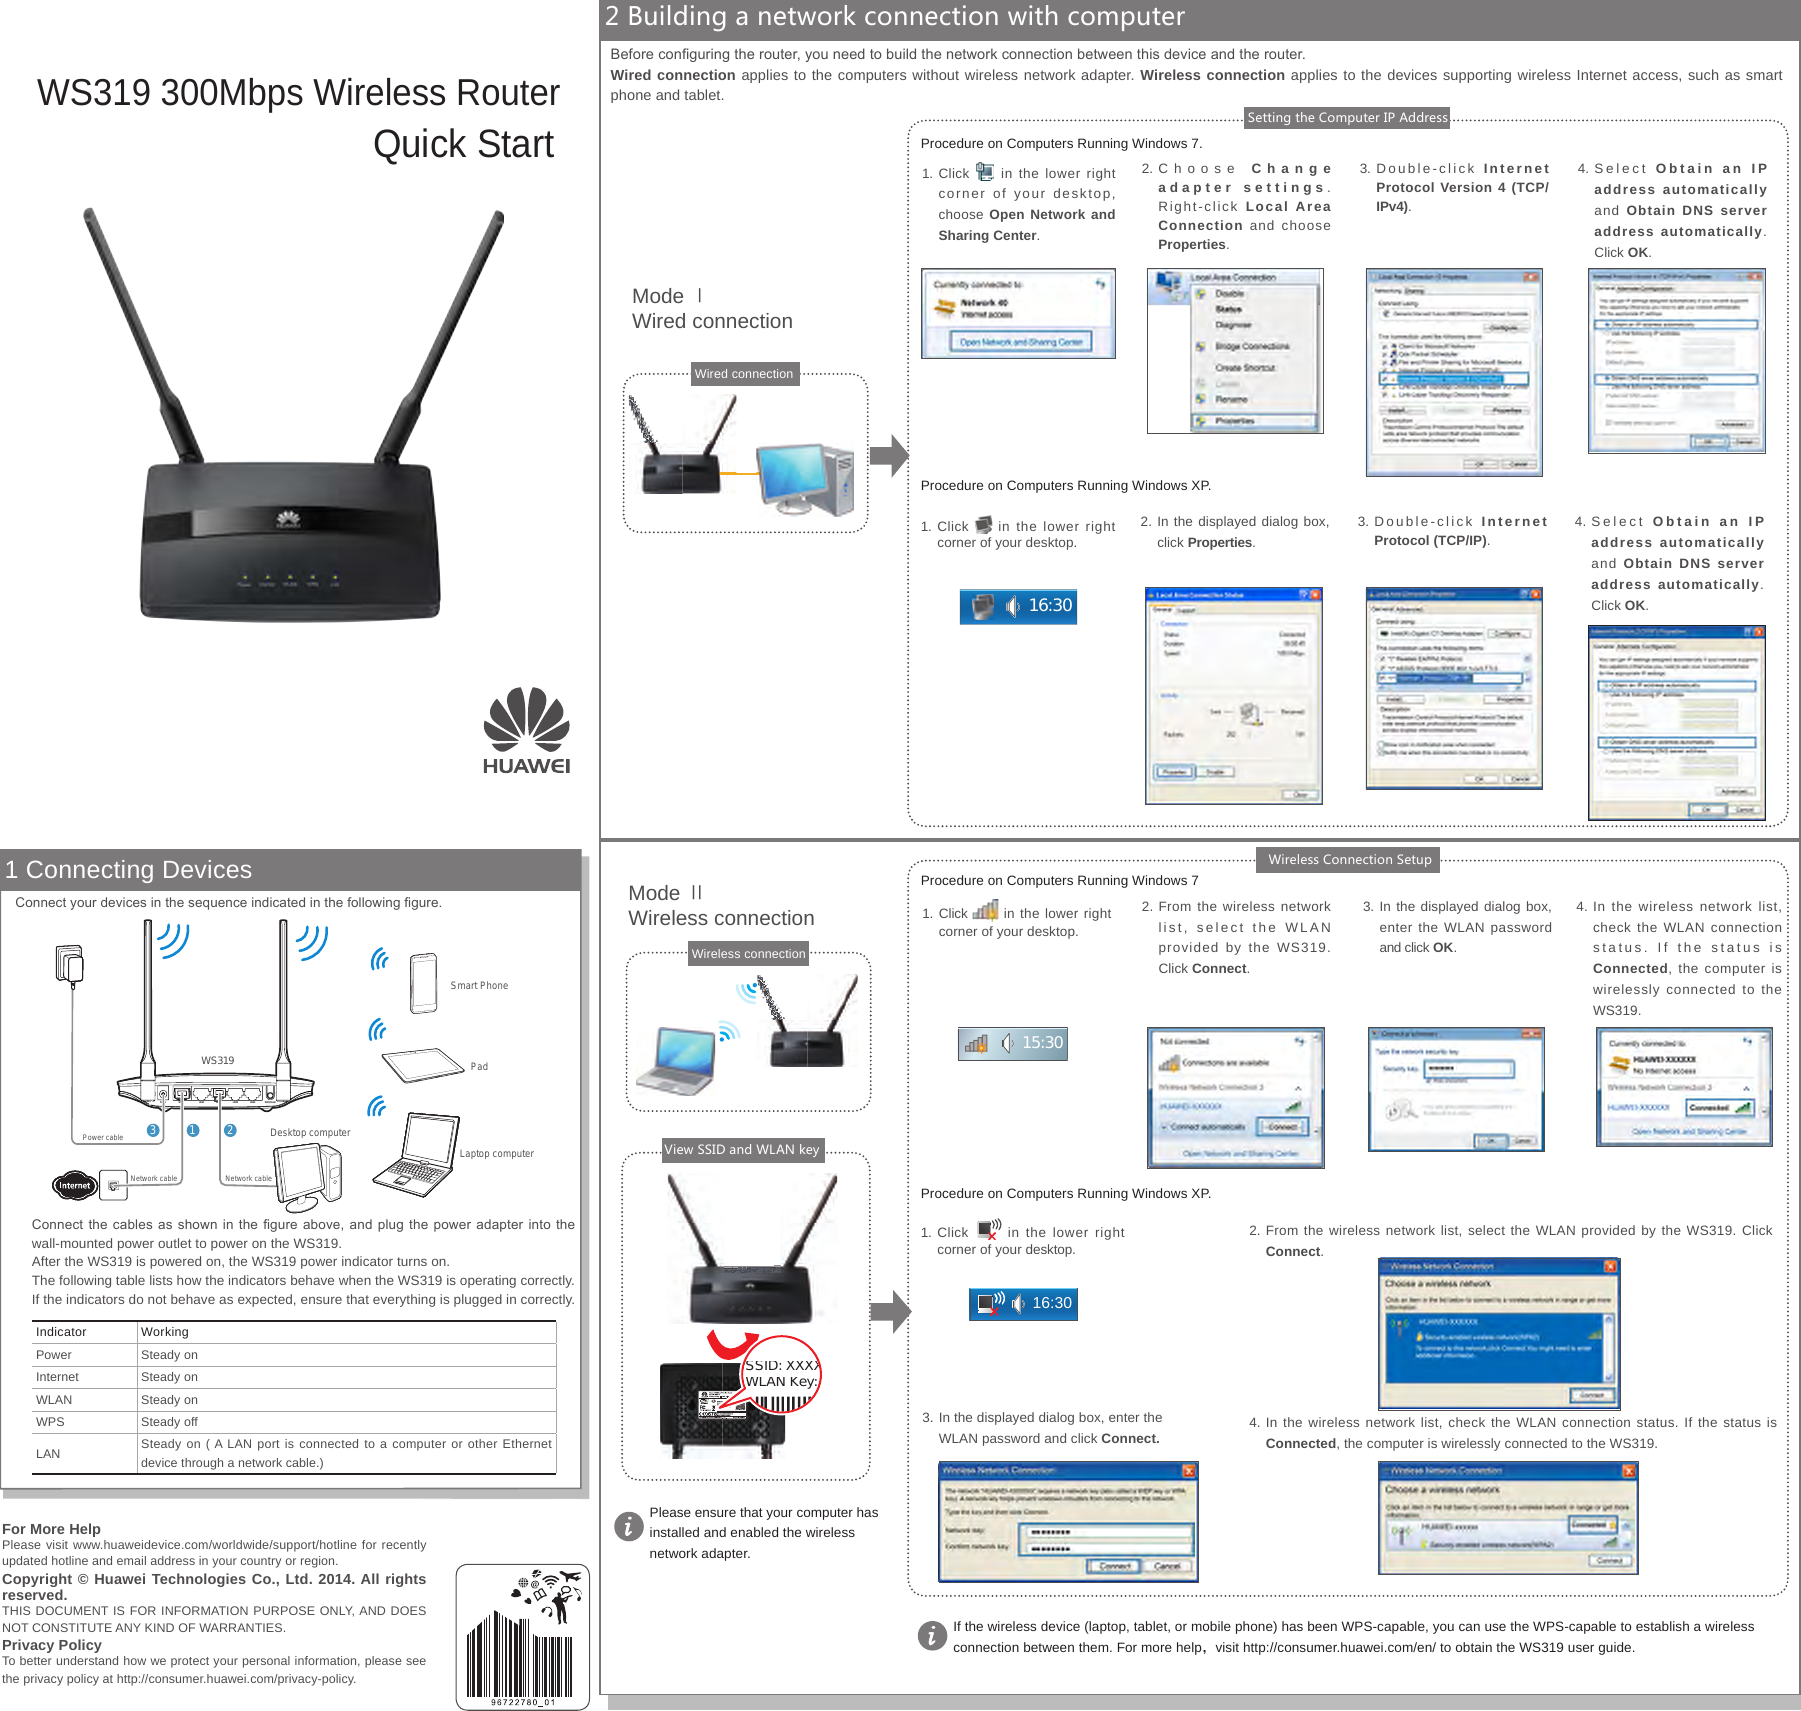 Quick StartWS319 300Mbps Wireless Router2 Building a network connection with computer1 Connecting DevicesSSID: XXXXWLAN Key: 1. Click   in the lower right  corner of your desktop. 2. From the wireless network list, select the WLAN provided by the WS319. Click Connect.3.  In the displayed dialog box, enter the WLAN password and click OK.4. In the wireless network list, check the WLAN connection status. If the status is Connected, the computer is wirelessly connected to the WS319.1. Click in the lower right corner of your desktop, choose Open Network and Sharing Center. 2. Choose  Change adapter settings.  Right-click  Local Area Connection and choose Properties. Procedure on Computers Running Windows 7.Procedure on Computers Running Windows 73. Double-click  Internet Protocol Version 4 (TCP/IPv4).4. Select  Obtain an IP address automatically and  Obtain DNS server address automatically. Click OK.Mode ⅡWireless connectionMode ⅠWired connectionIf the wireless device (laptop, tablet, or mobile phone) has been WPS-capable, you can use the WPS-capable to establish a wireless connection between them. For more help，visit http://consumer.huawei.com/en/ to obtain the WS319 user guide.Please ensure that your computer has installed and enabled the wireless network adapter.View SSID and WLAN keySetting the Computer IP AddressWireless Connection SetupProcedure on Computers Running Windows XP.Procedure on Computers Running Windows XP.1. Click   in the lower right corner of your desktop. 2. In the displayed dialog box, click Properties.3. Double-click  Internet Protocol (TCP/IP).4. Select  Obtain an IP address automatically and  Obtain DNS server address automatically. Click OK.1.  Click   in the lower right corner of your desktop. 2. From the wireless network list, select the WLAN provided by the WS319. Click Connect.3. In the displayed dialog box, enter the WLAN password and click Connect. 4. In the wireless network list, check the WLAN connection status. If the status is Connected, the computer is wirelessly connected to the WS319.Connect the cables as shown in the  gure  above,  and  plug  the  power  adapter  into the wall-mounted power outlet to power on the WS319.After the WS319 is powered on, the WS319 power indicator turns on.The following table lists how the indicators behave when the WS319 is operating correctly. If the indicators do not behave as expected, ensure that everything is plugged in correctly.Indicator WorkingPower Steady onInternet Steady onWLAN Steady onWPS Steady offLAN Steady on ( A LAN port is connected to a computer or other Ethernet device through a network cable.)                   Connect your devices in the sequence indicated in the following gure.Before conguring the router, you need to build the network connection between this device and the router.Wired connection applies to the computers without wireless network adapter. Wireless connection applies to the devices supporting wireless Internet access, such as smart phone and tablet.Wireless connection16:3015:3016:30For More HelpPlease visit www.huaweidevice.com/worldwide/support/hotline for recently updated hotline and email address in your country or region.Copyright © Huawei Technologies Co., Ltd. 2014. All rights reserved.THIS DOCUMENT IS FOR INFORMATION PURPOSE ONLY, AND DOES NOT CONSTITUTE ANY KIND OF WARRANTIES.Privacy PolicyTo better understand how we protect your personal information, please see the privacy policy at http://consumer.huawei.com/privacy-policy.Wired connectionWS319LAN1 LAN2 LAN3 LAN4WANPower WPS/Reset312Desktop computerLaptop computerPadSmart PhonePower cableNetwork cable Network cable